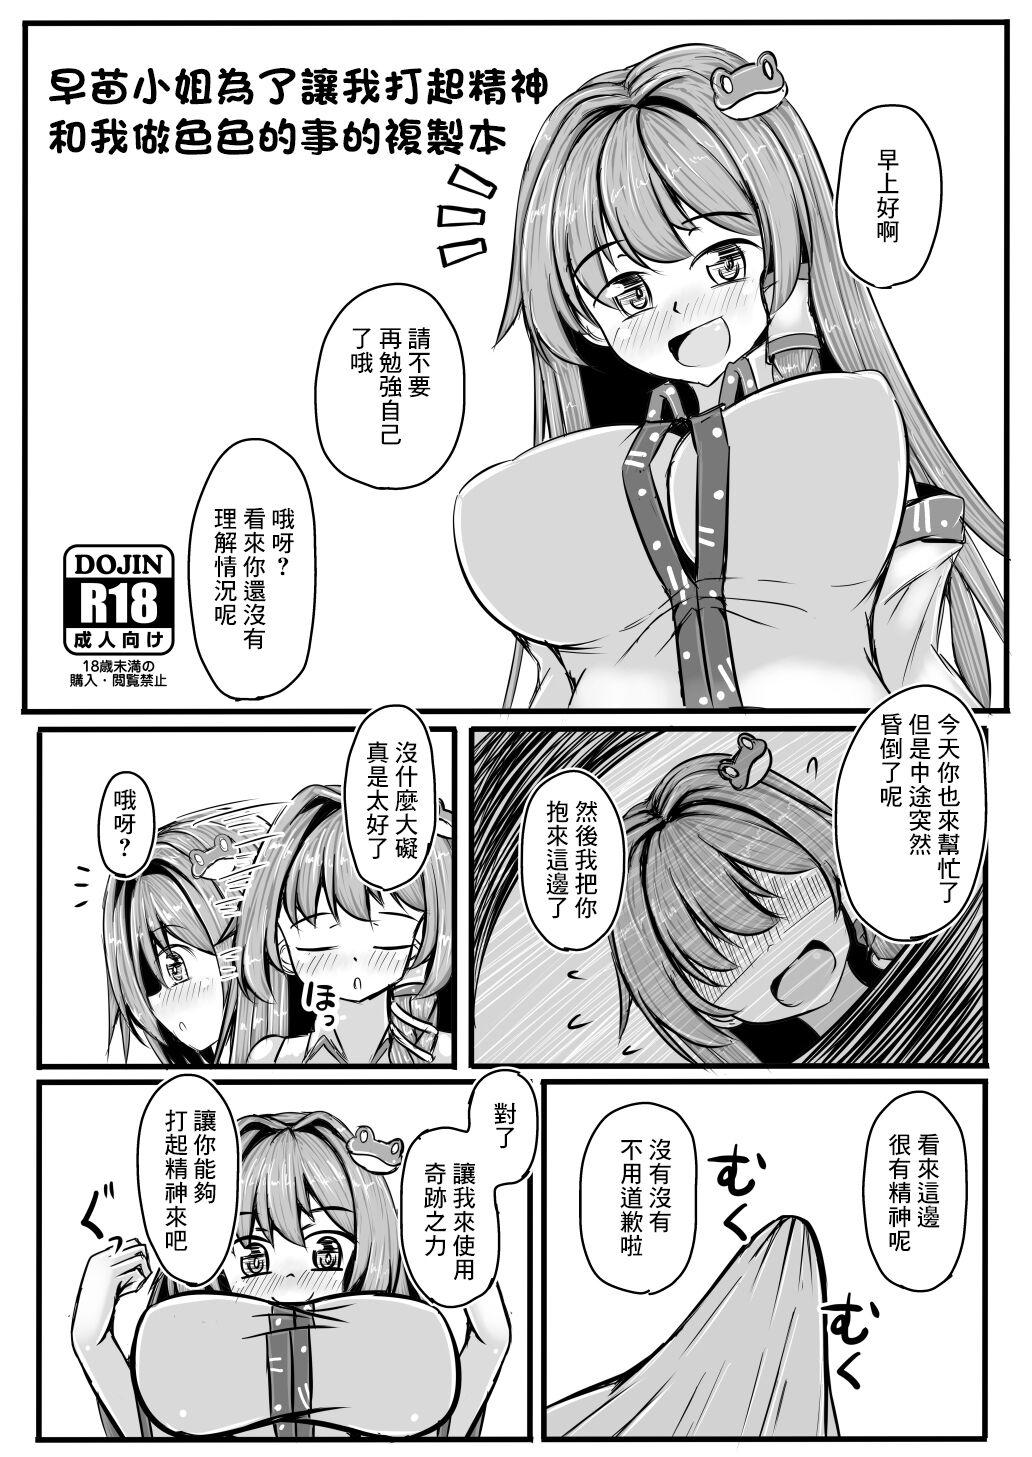 Asslick 早苗さんと元気になるえっちするコピ本 - Touhou project Petite Girl Porn - Page 1